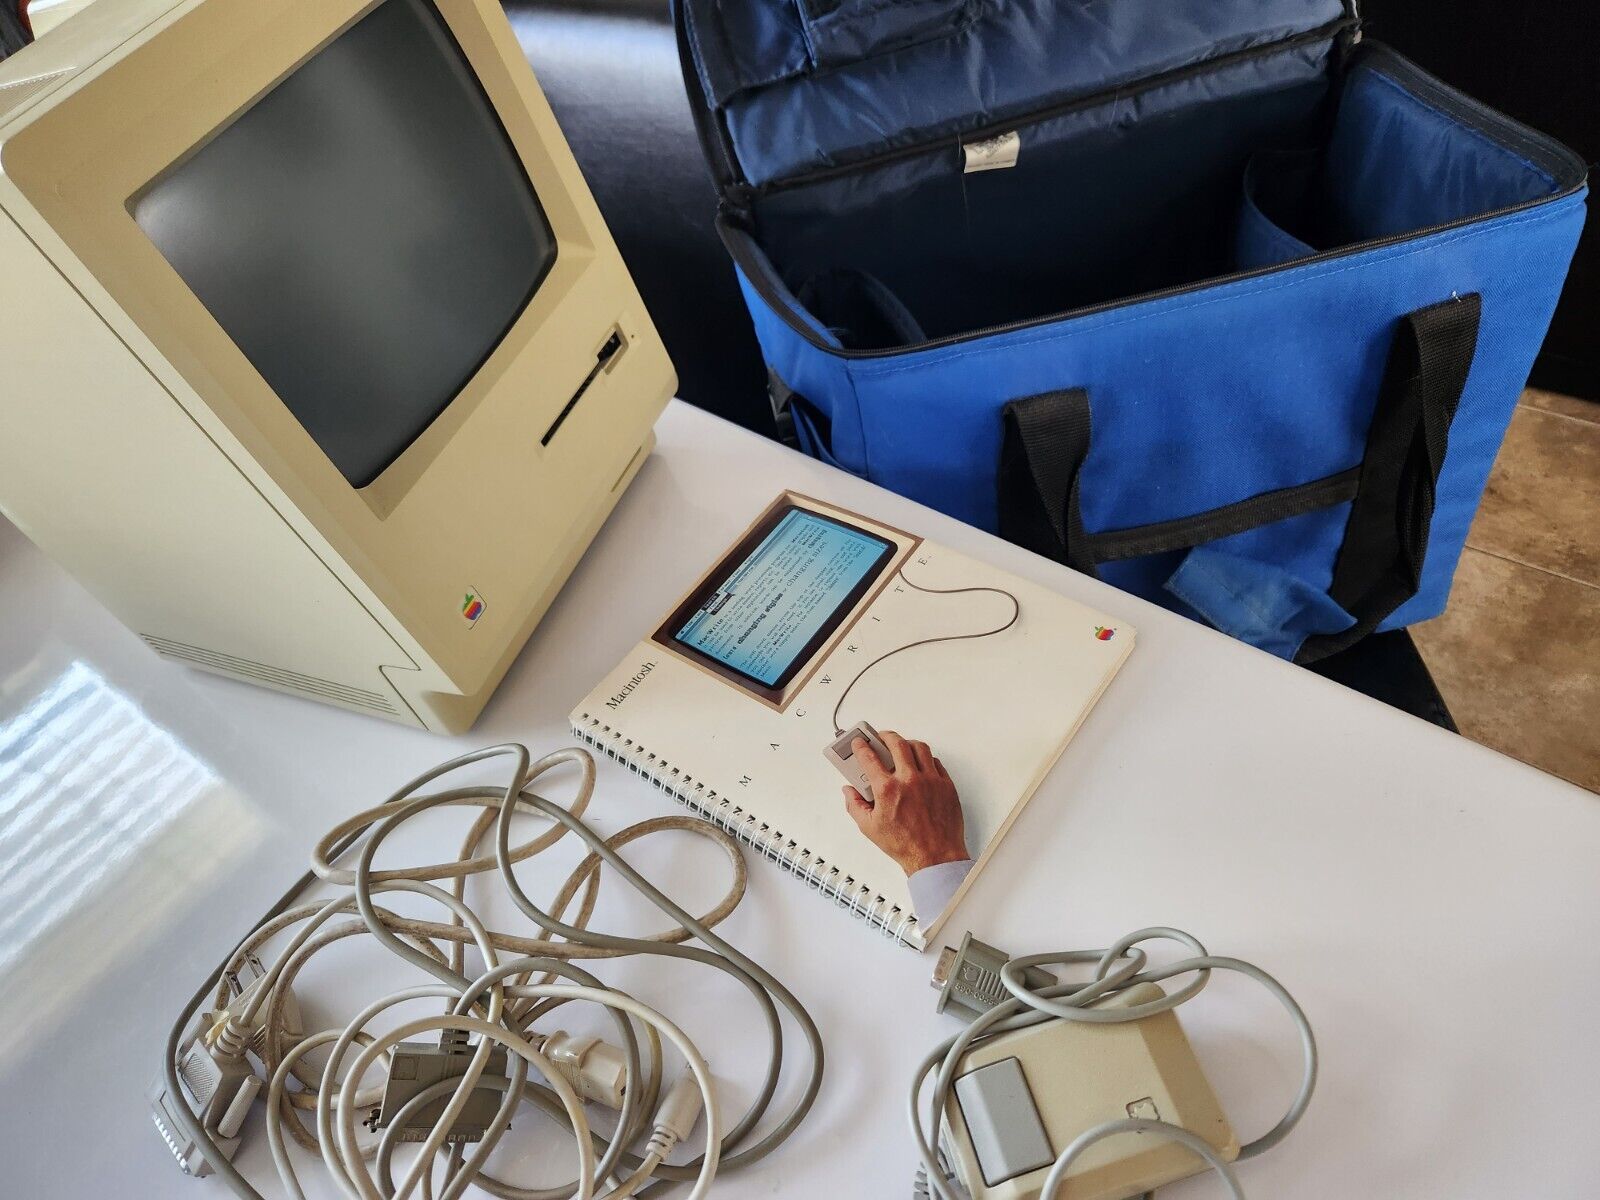 Apple Macintosh 128K M0001 Computer with Mouse, no keyboard. Case included. 1984